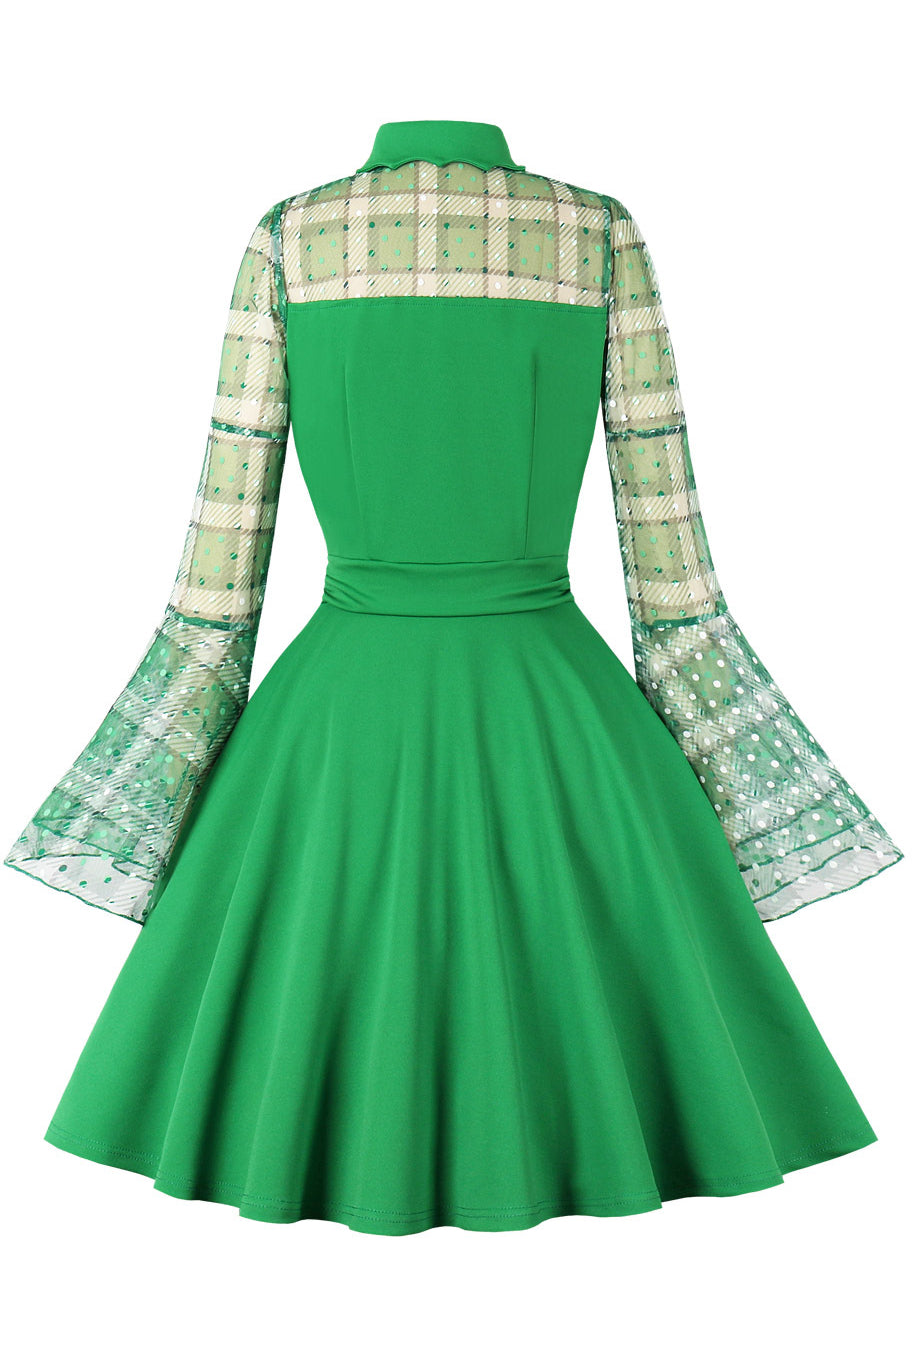 Green Dotted Plaid Bell Sleeves A-line Vintage Dress